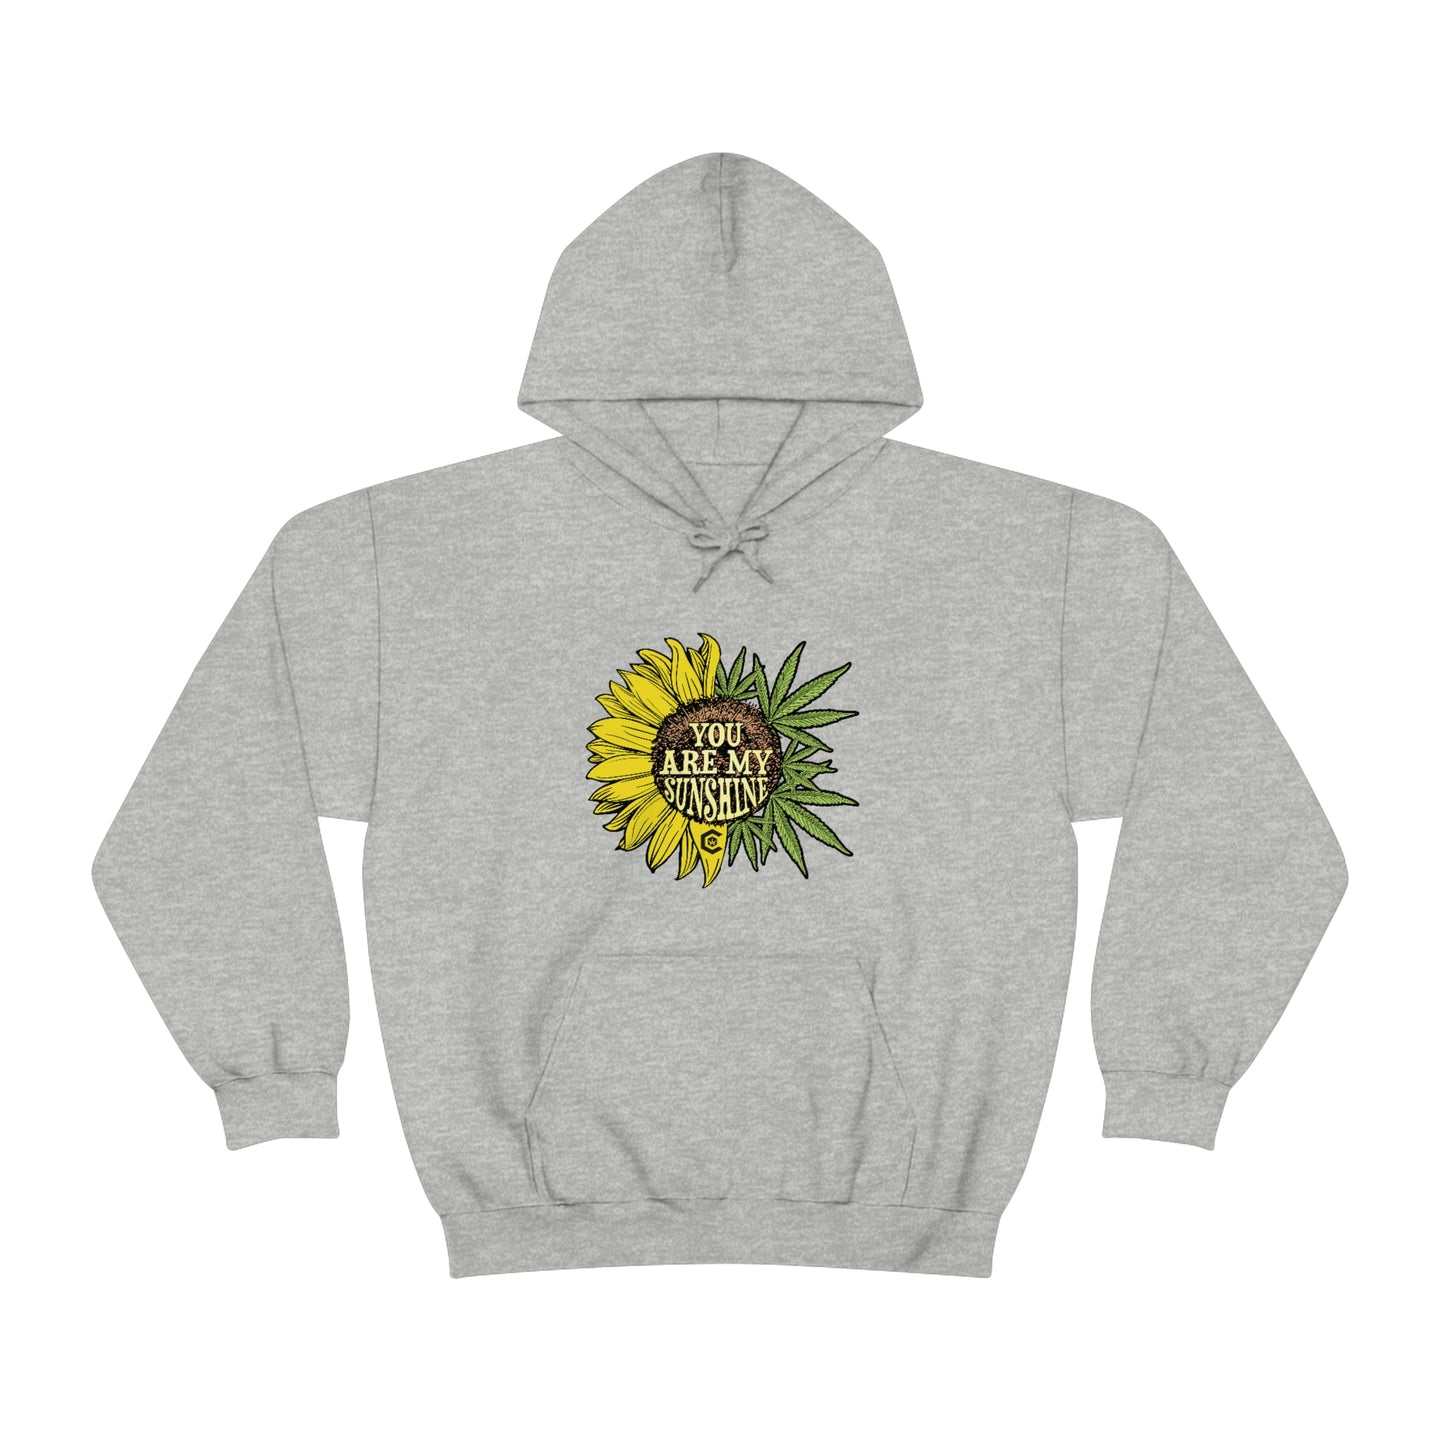 a grey You Are My Sunshine Cannabis Sweatshirt with a sunflower on it.